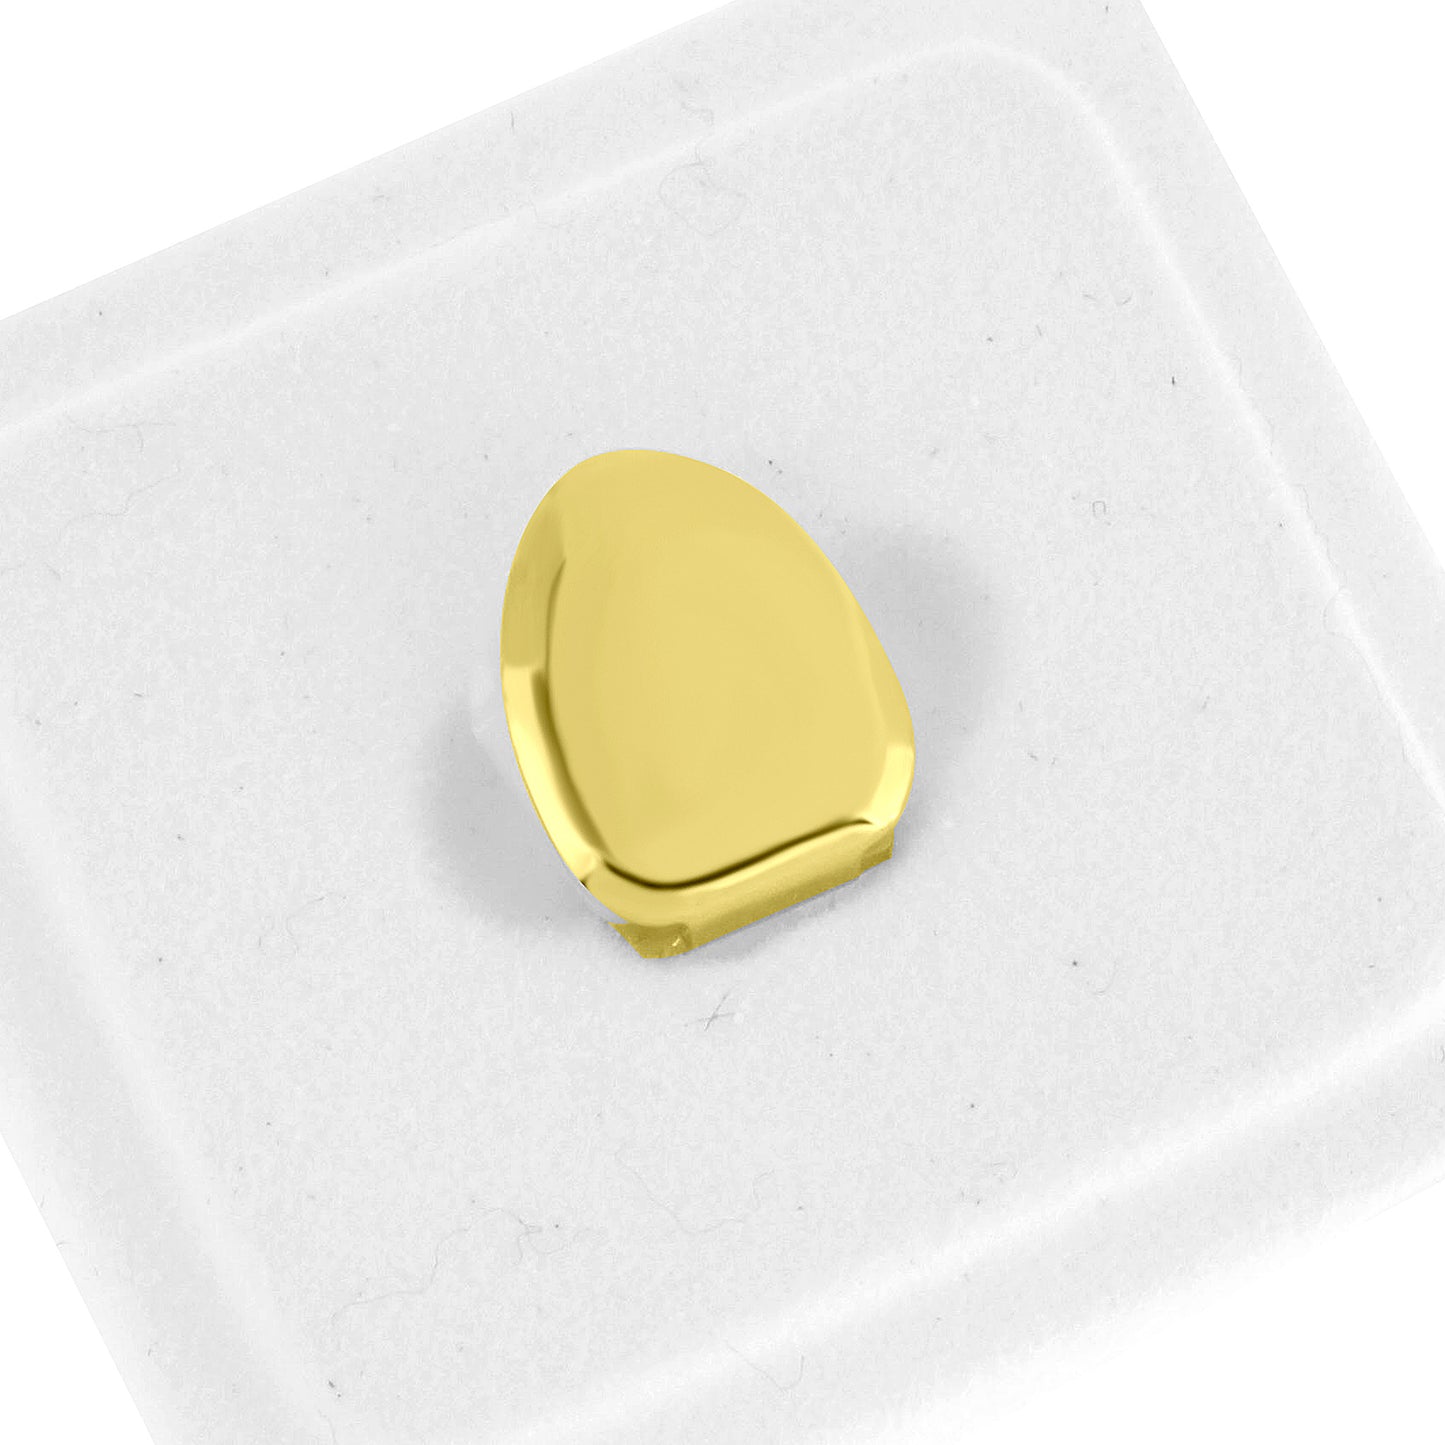 Single Tooth Cap Grillz Plian Design Solid Front Yellow Gold Finish